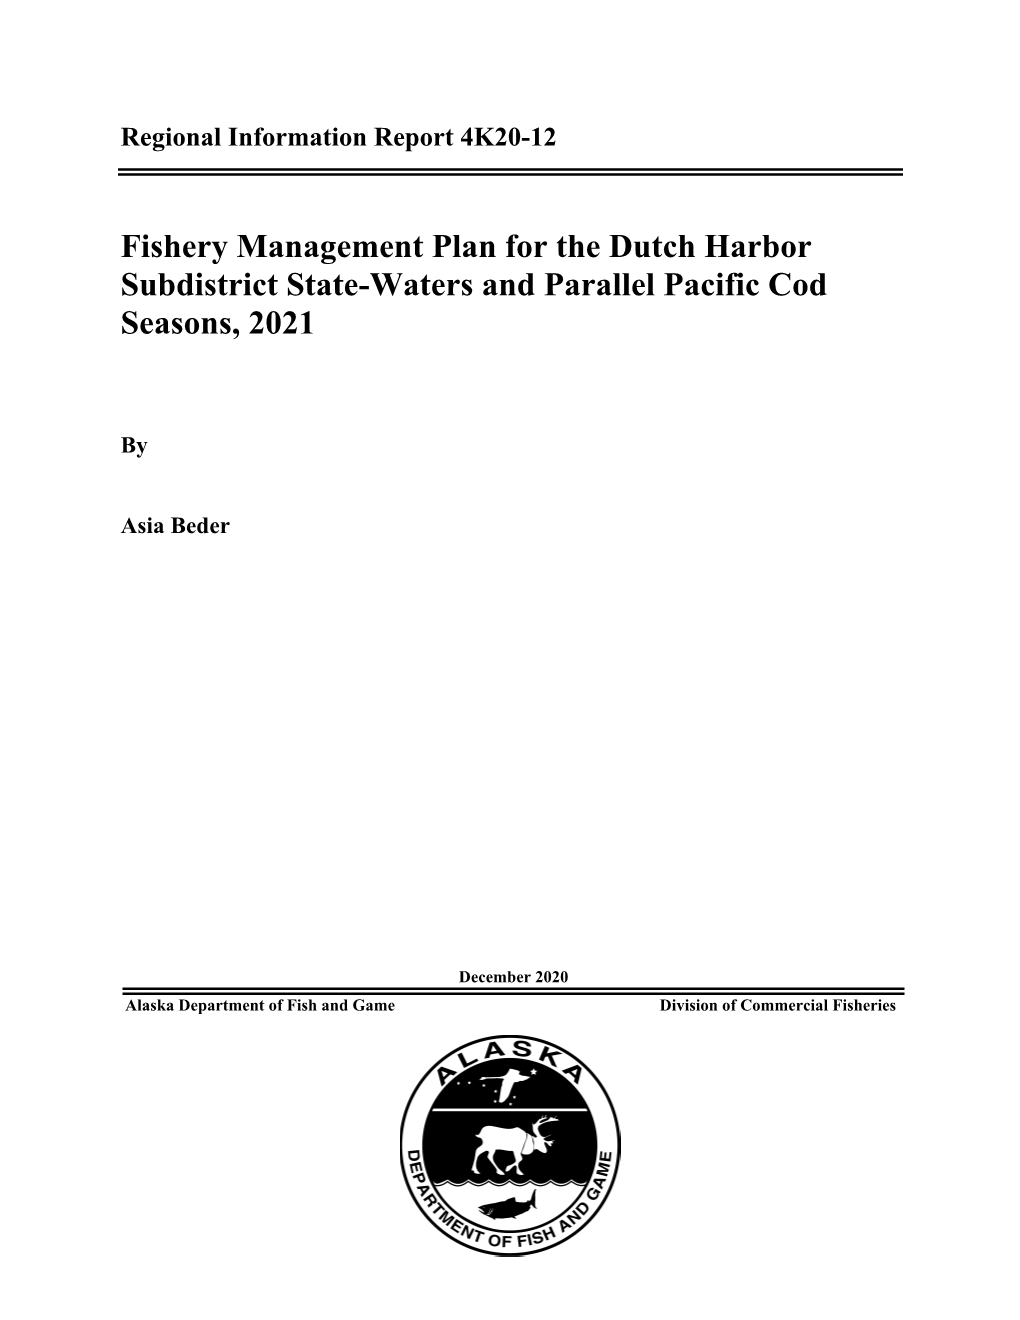 Fishery Management Plan for the Dutch Harbor Subdistrict State-Waters and Parallel Pacific Cod Seasons, 2021